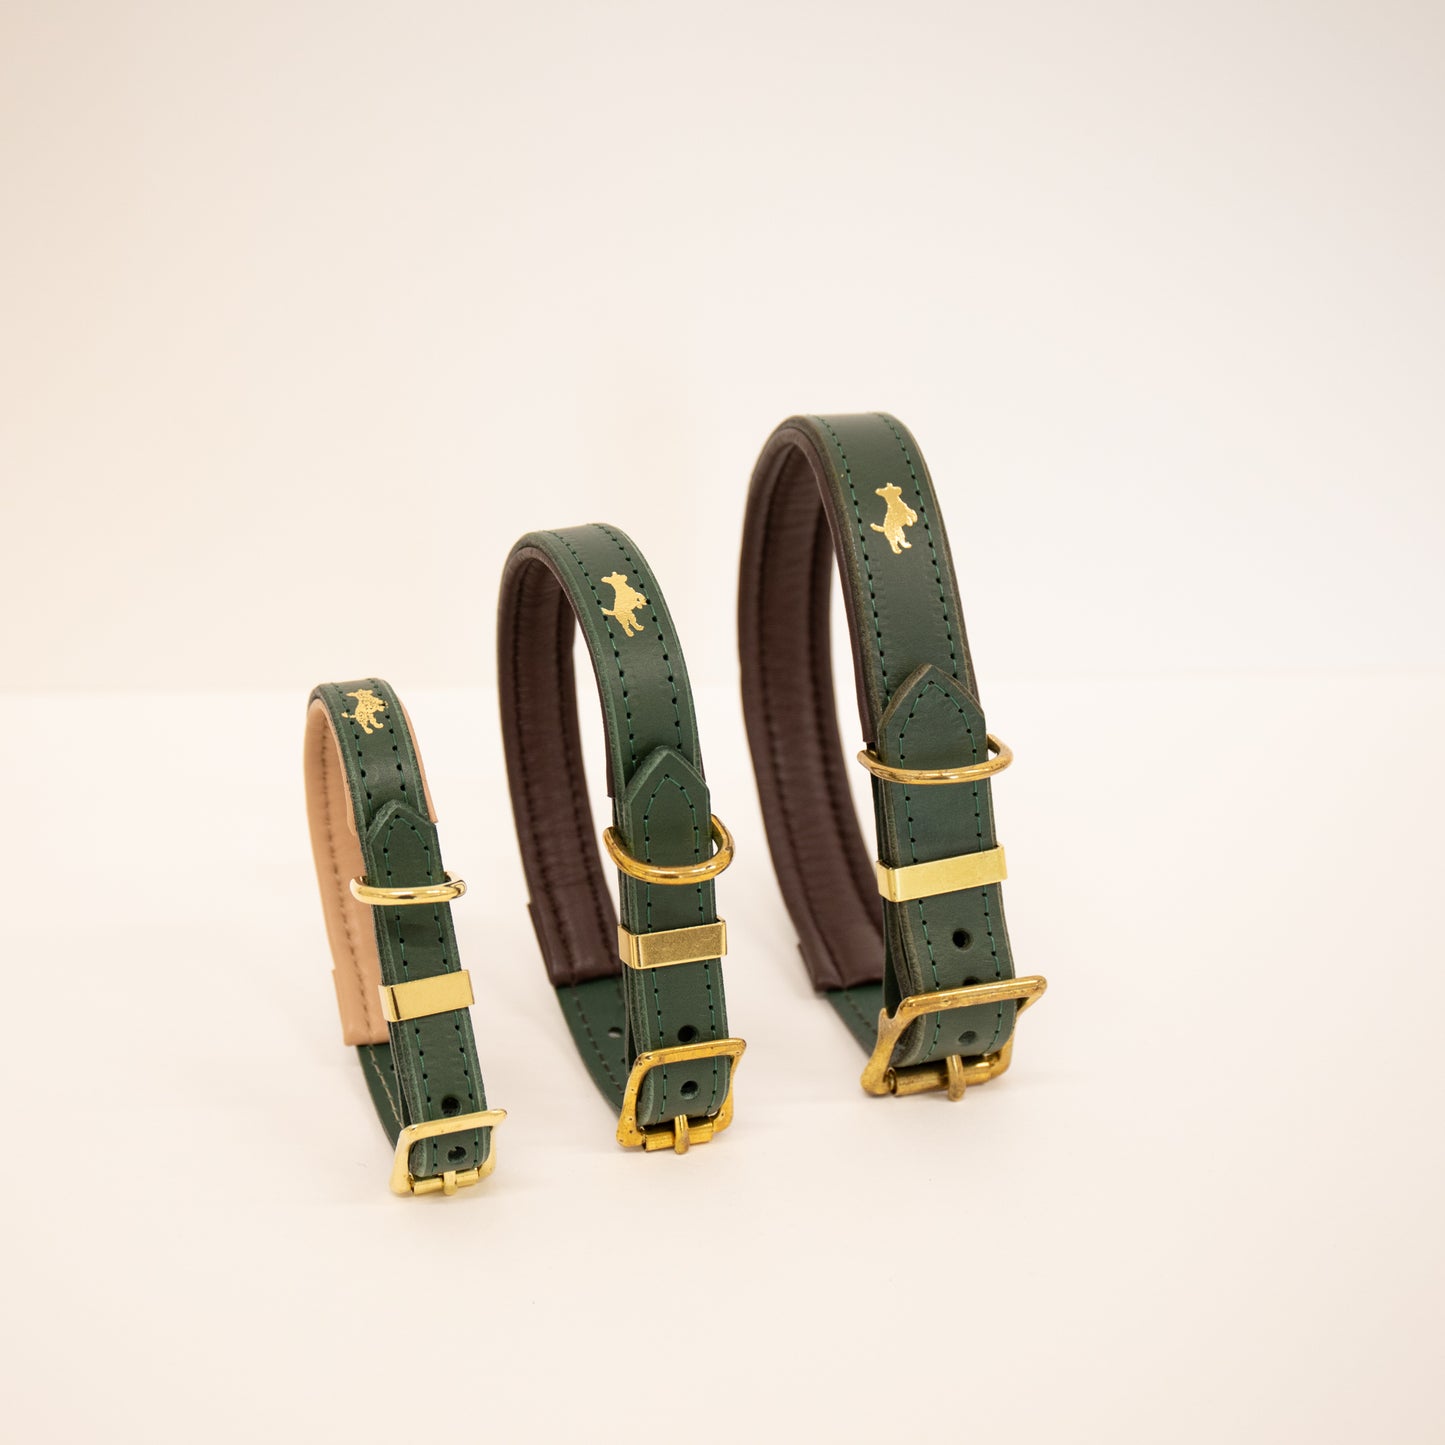 Forest padded Luxury leather dog collar